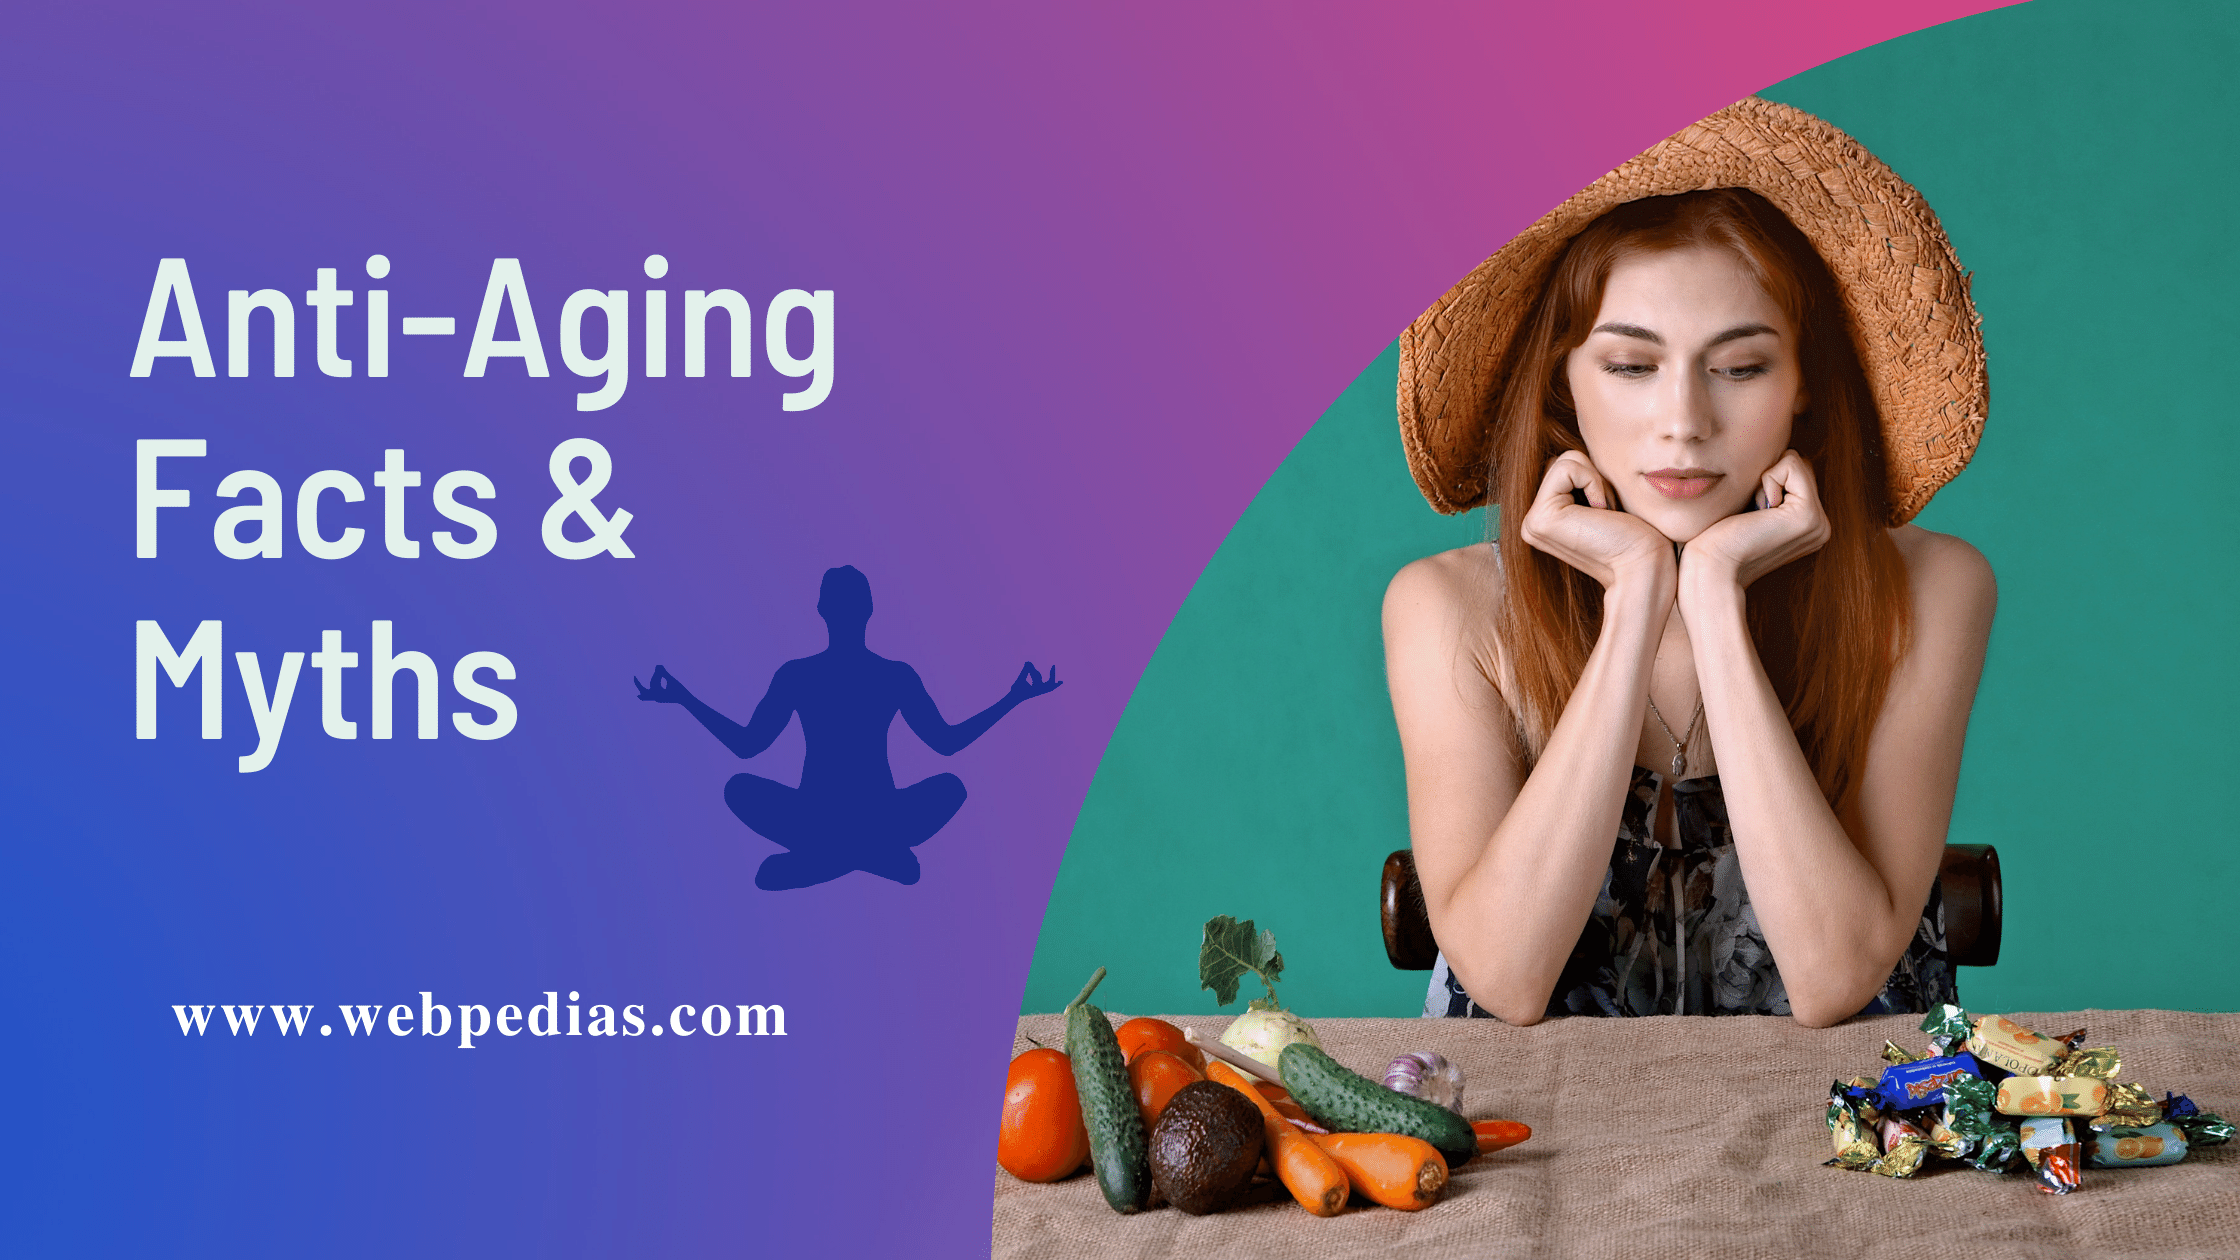 Anti-Aging Facts & Myths